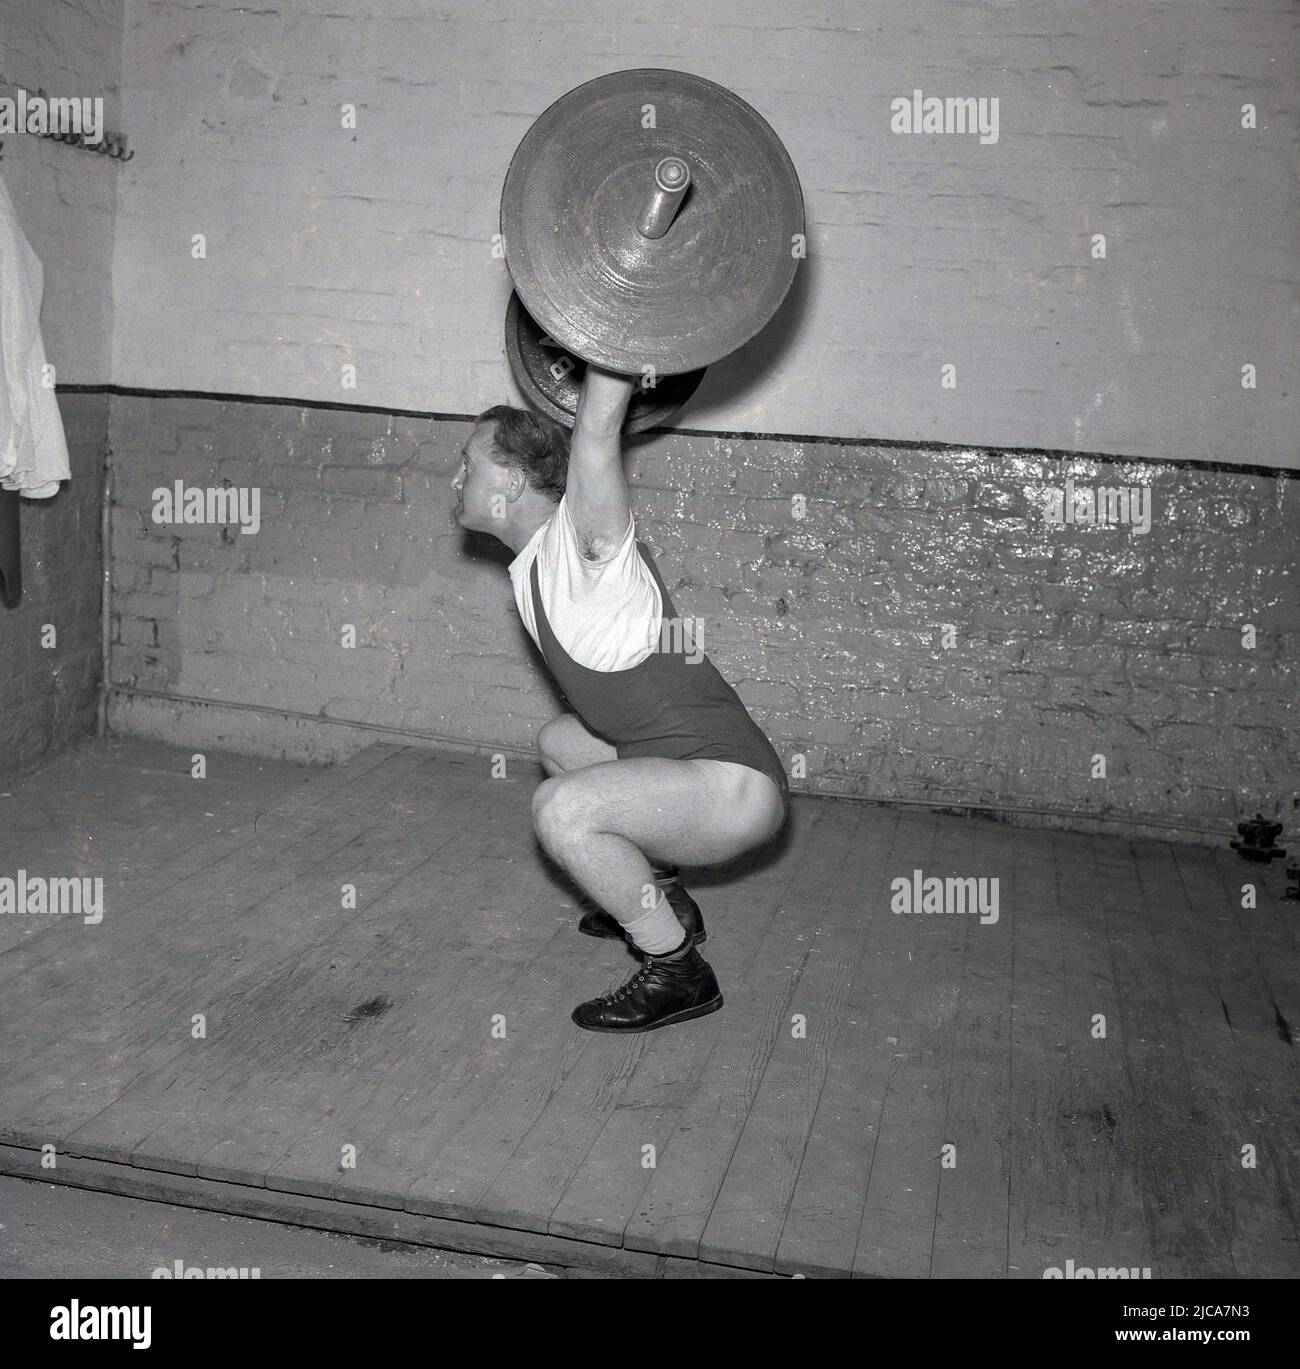 1957, historical, weight-lifting, inside a gym on a wooden board, a male weightlifter training, doing the snatch, Stockport, England, UK. The snatch is one of the two lifts in competitive or Olympic-style weightlifting. He is wearing weightlifting shoes, but is not wearing the traditional wide leather weightlifting belt. Stock Photo